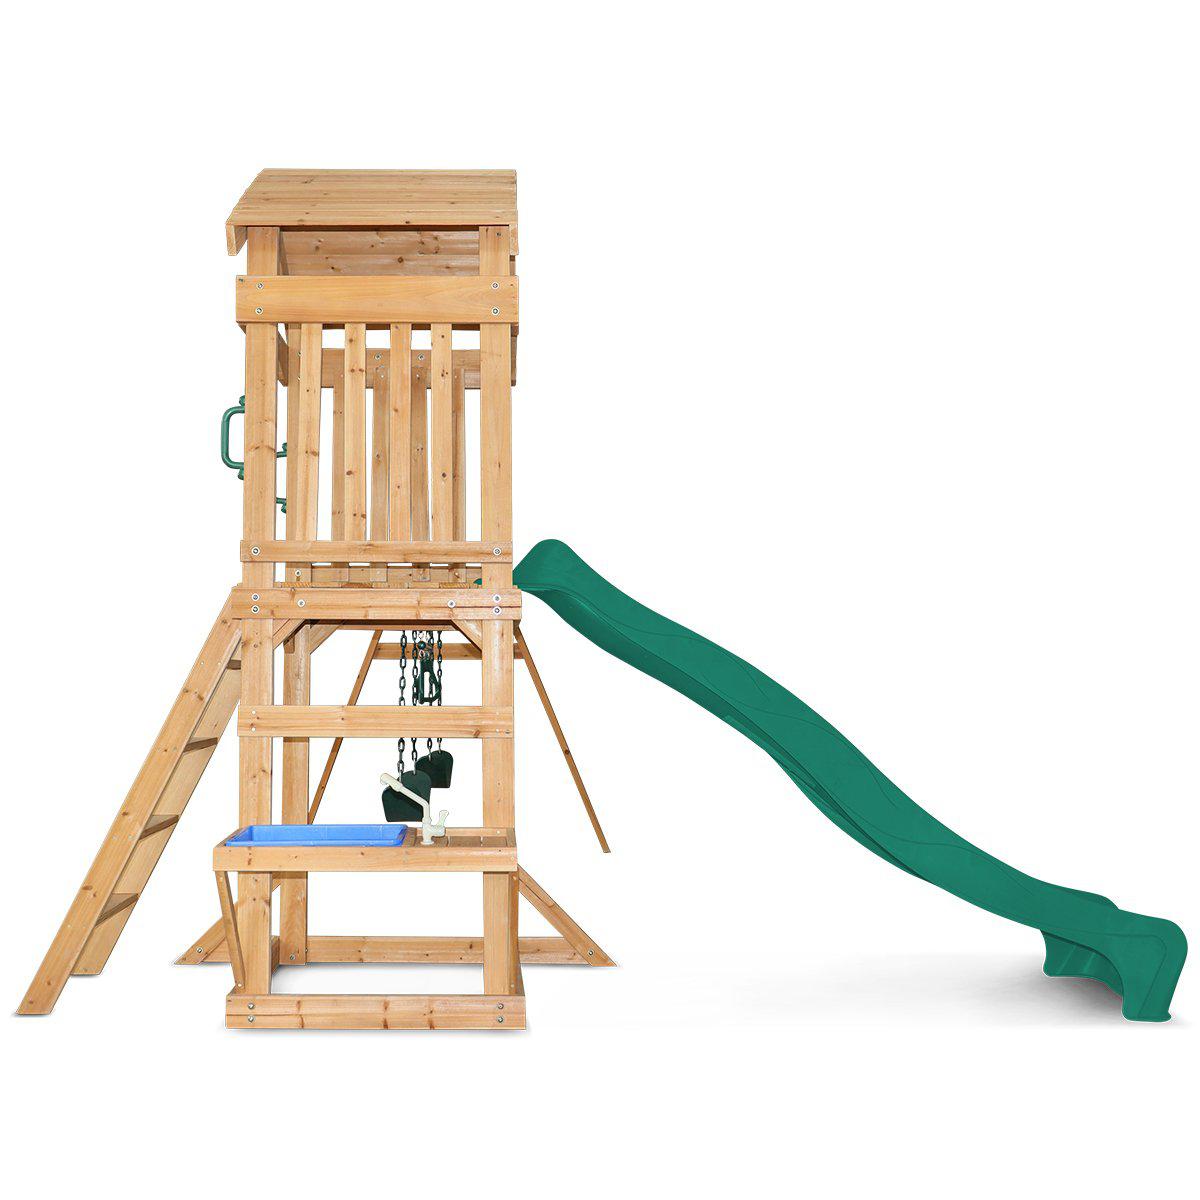 Albert Park Swing Set with Slide: Active Fun and Happiness for Kids